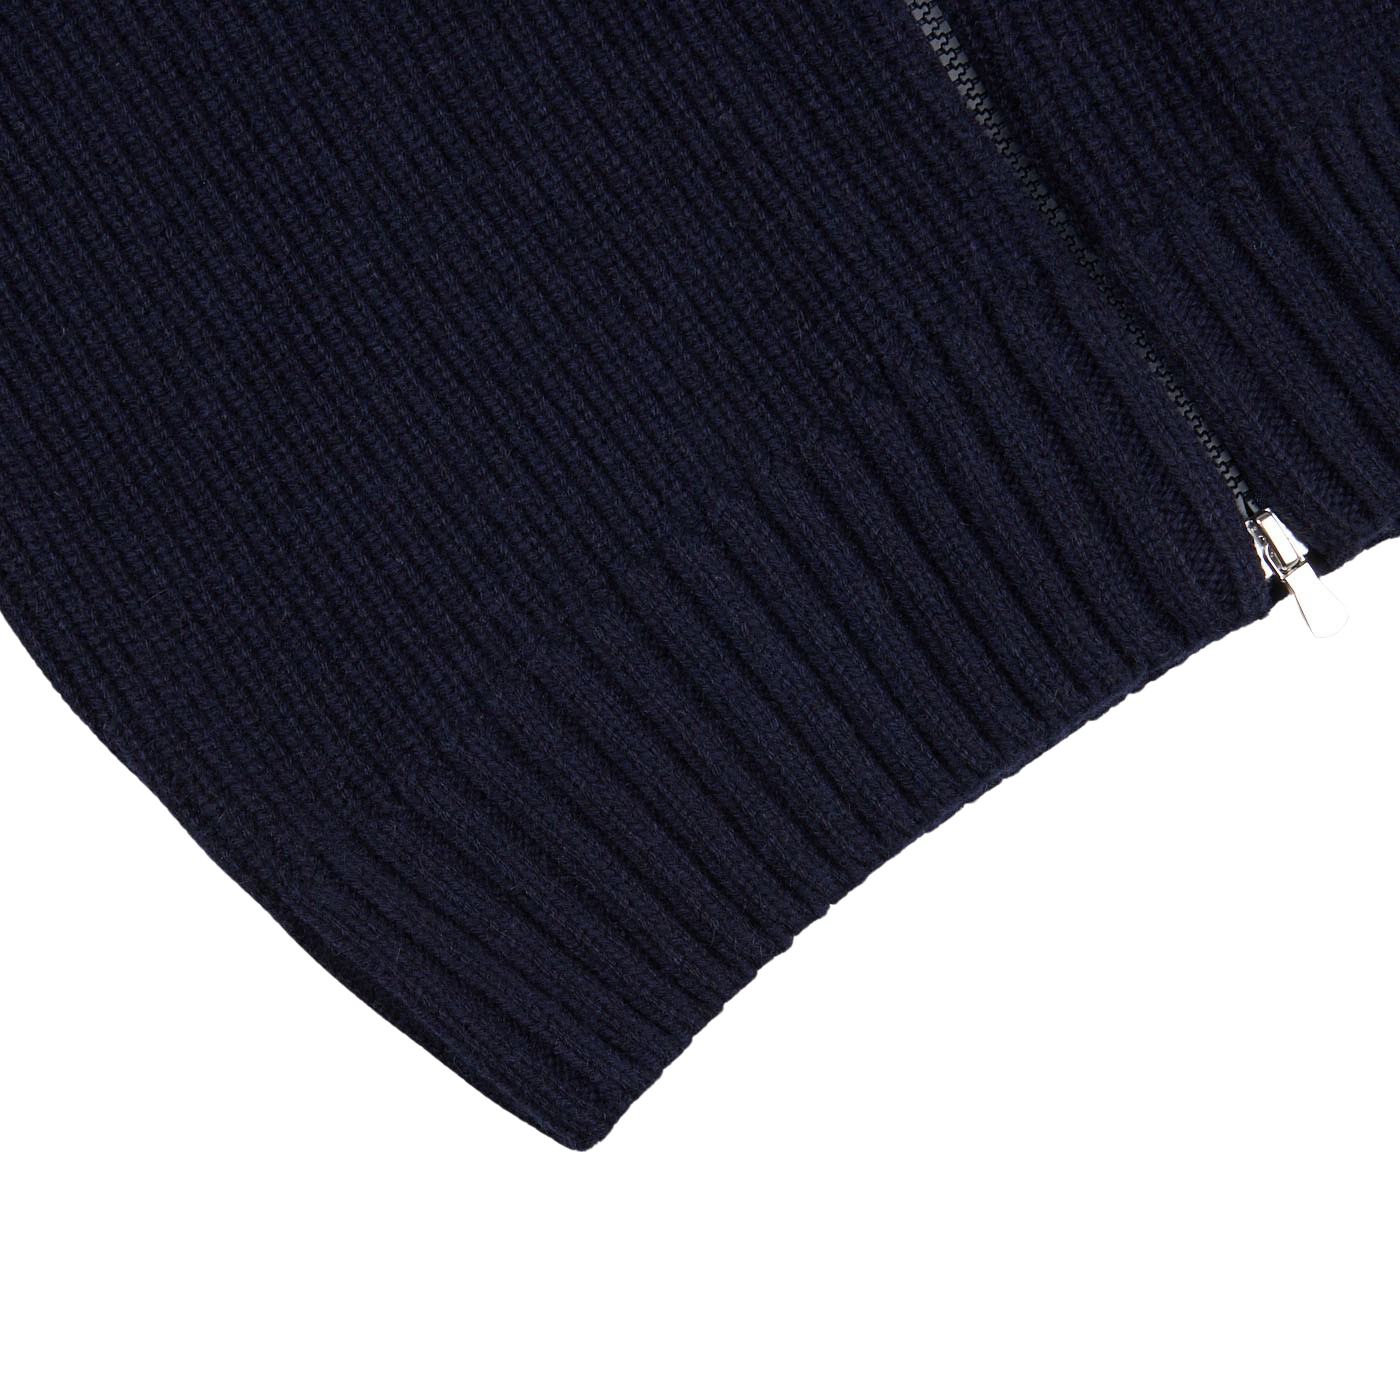 A Gran Sasso production close up of a Navy Blue Eco Cashmere Funnel Neck Cardigan.